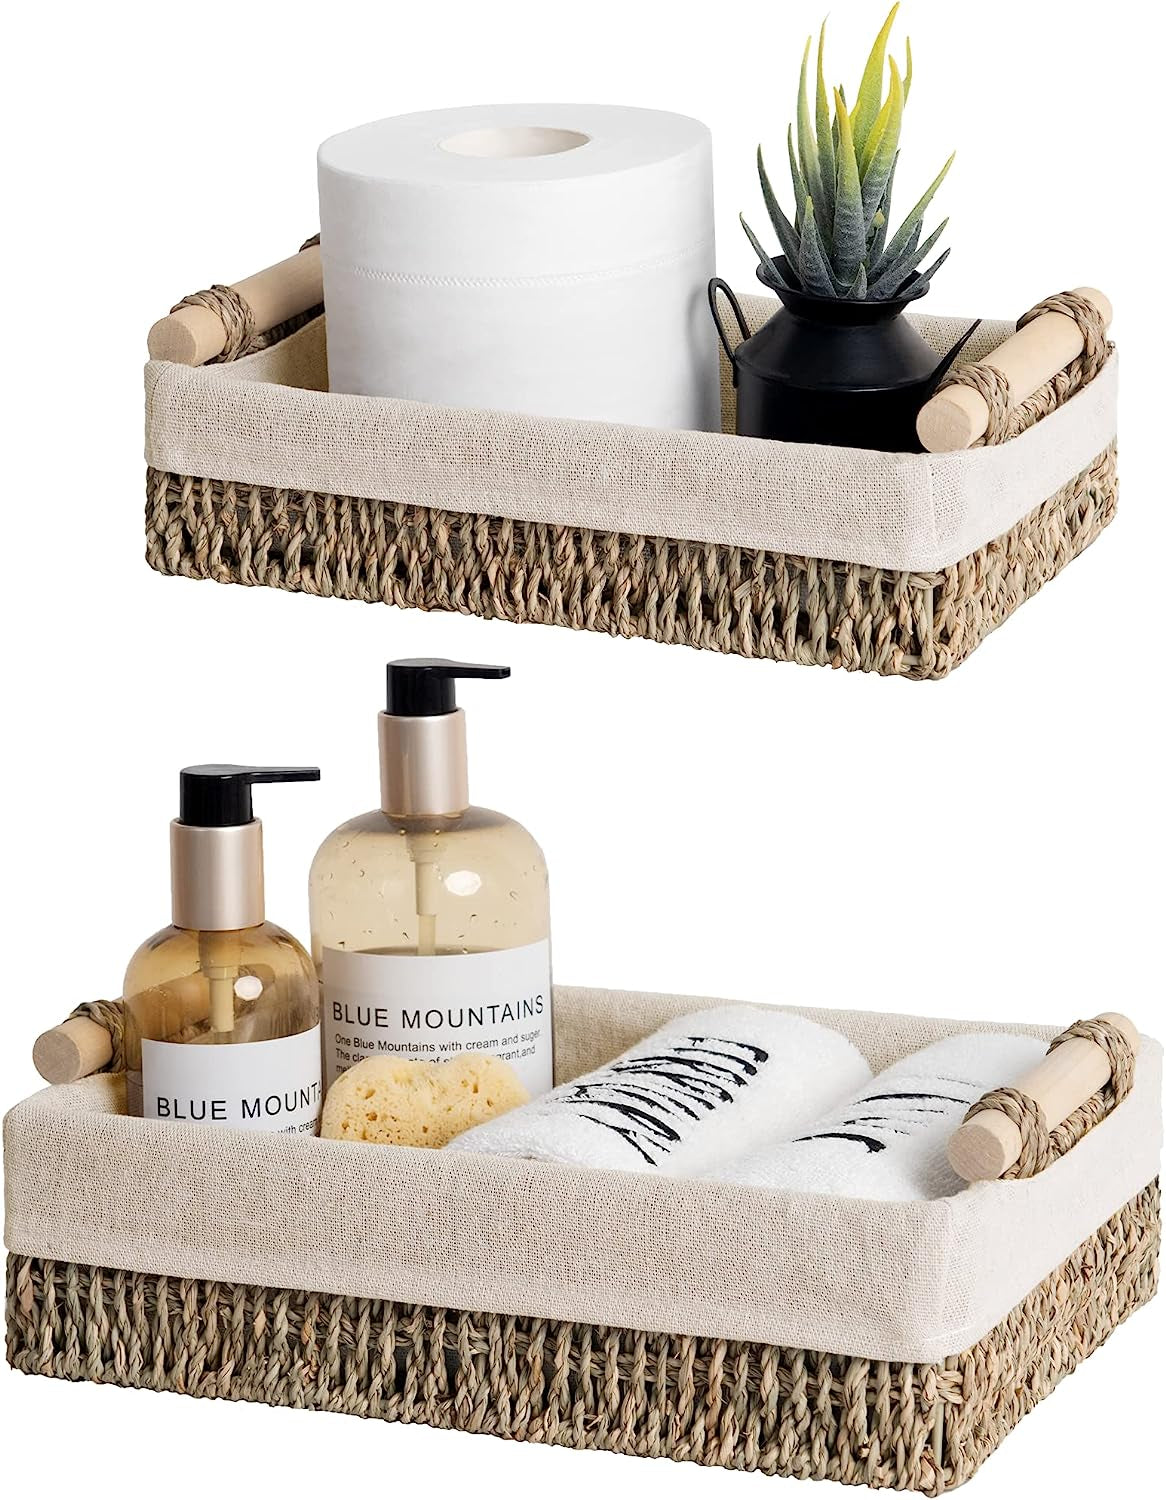 Small Seagrass Baskets for Organizing, Wicker Basket for Organizer, Storage Baskets with Wooden Handles and Natural Fiber Liner, Set of 2